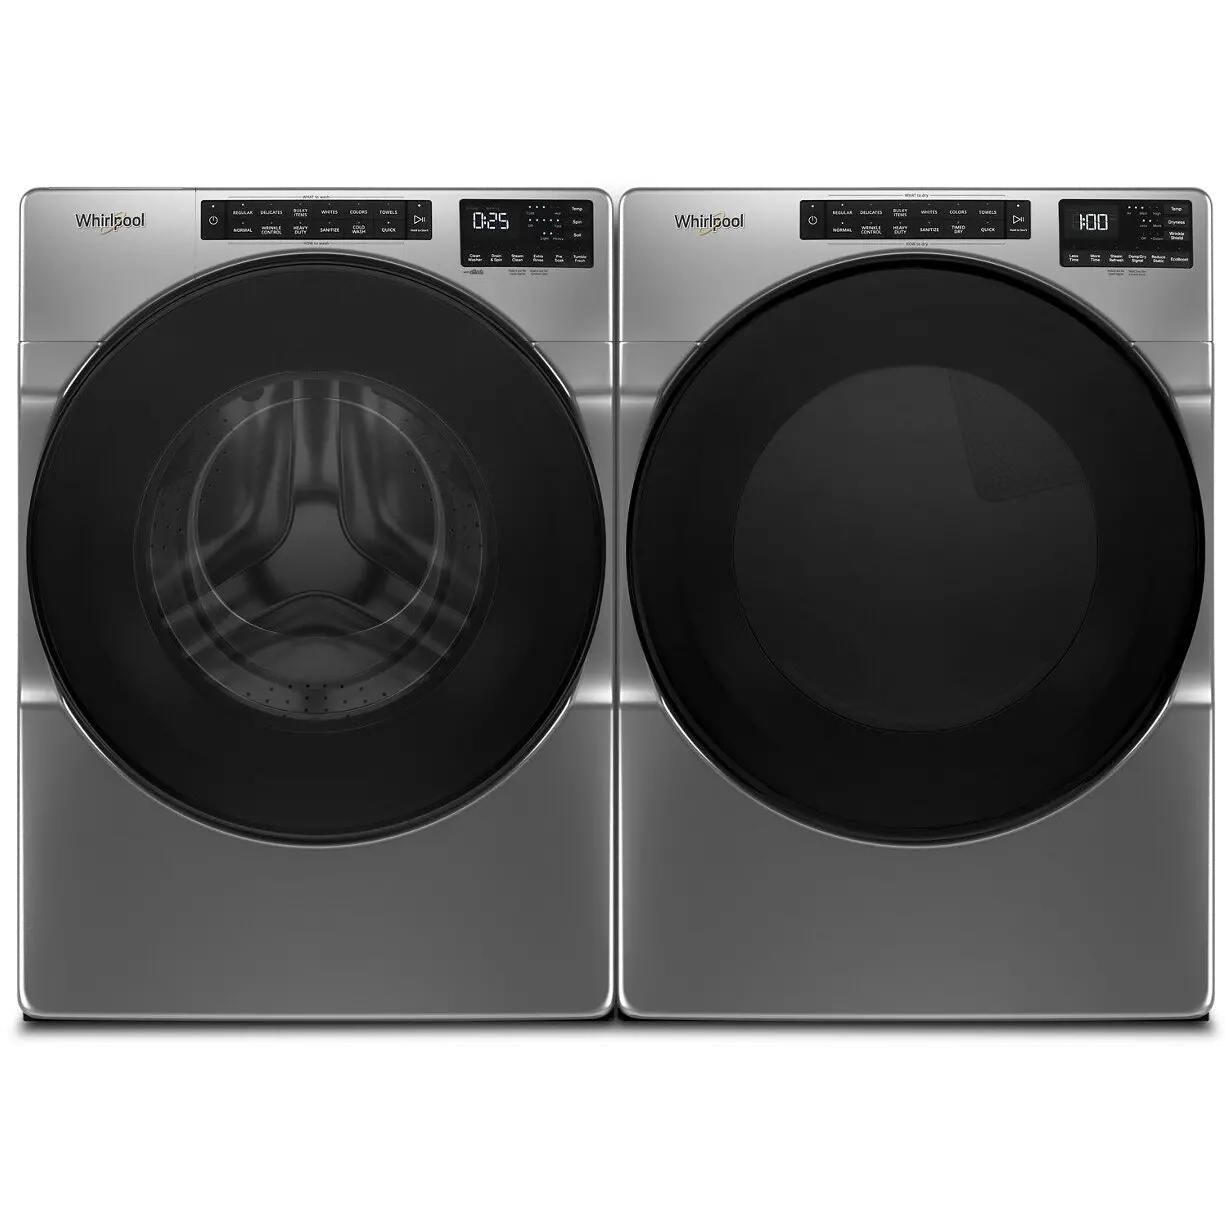 KIT Whirlpool Electric Washer and Dryer Set - Chrome Shadow W6605C-1